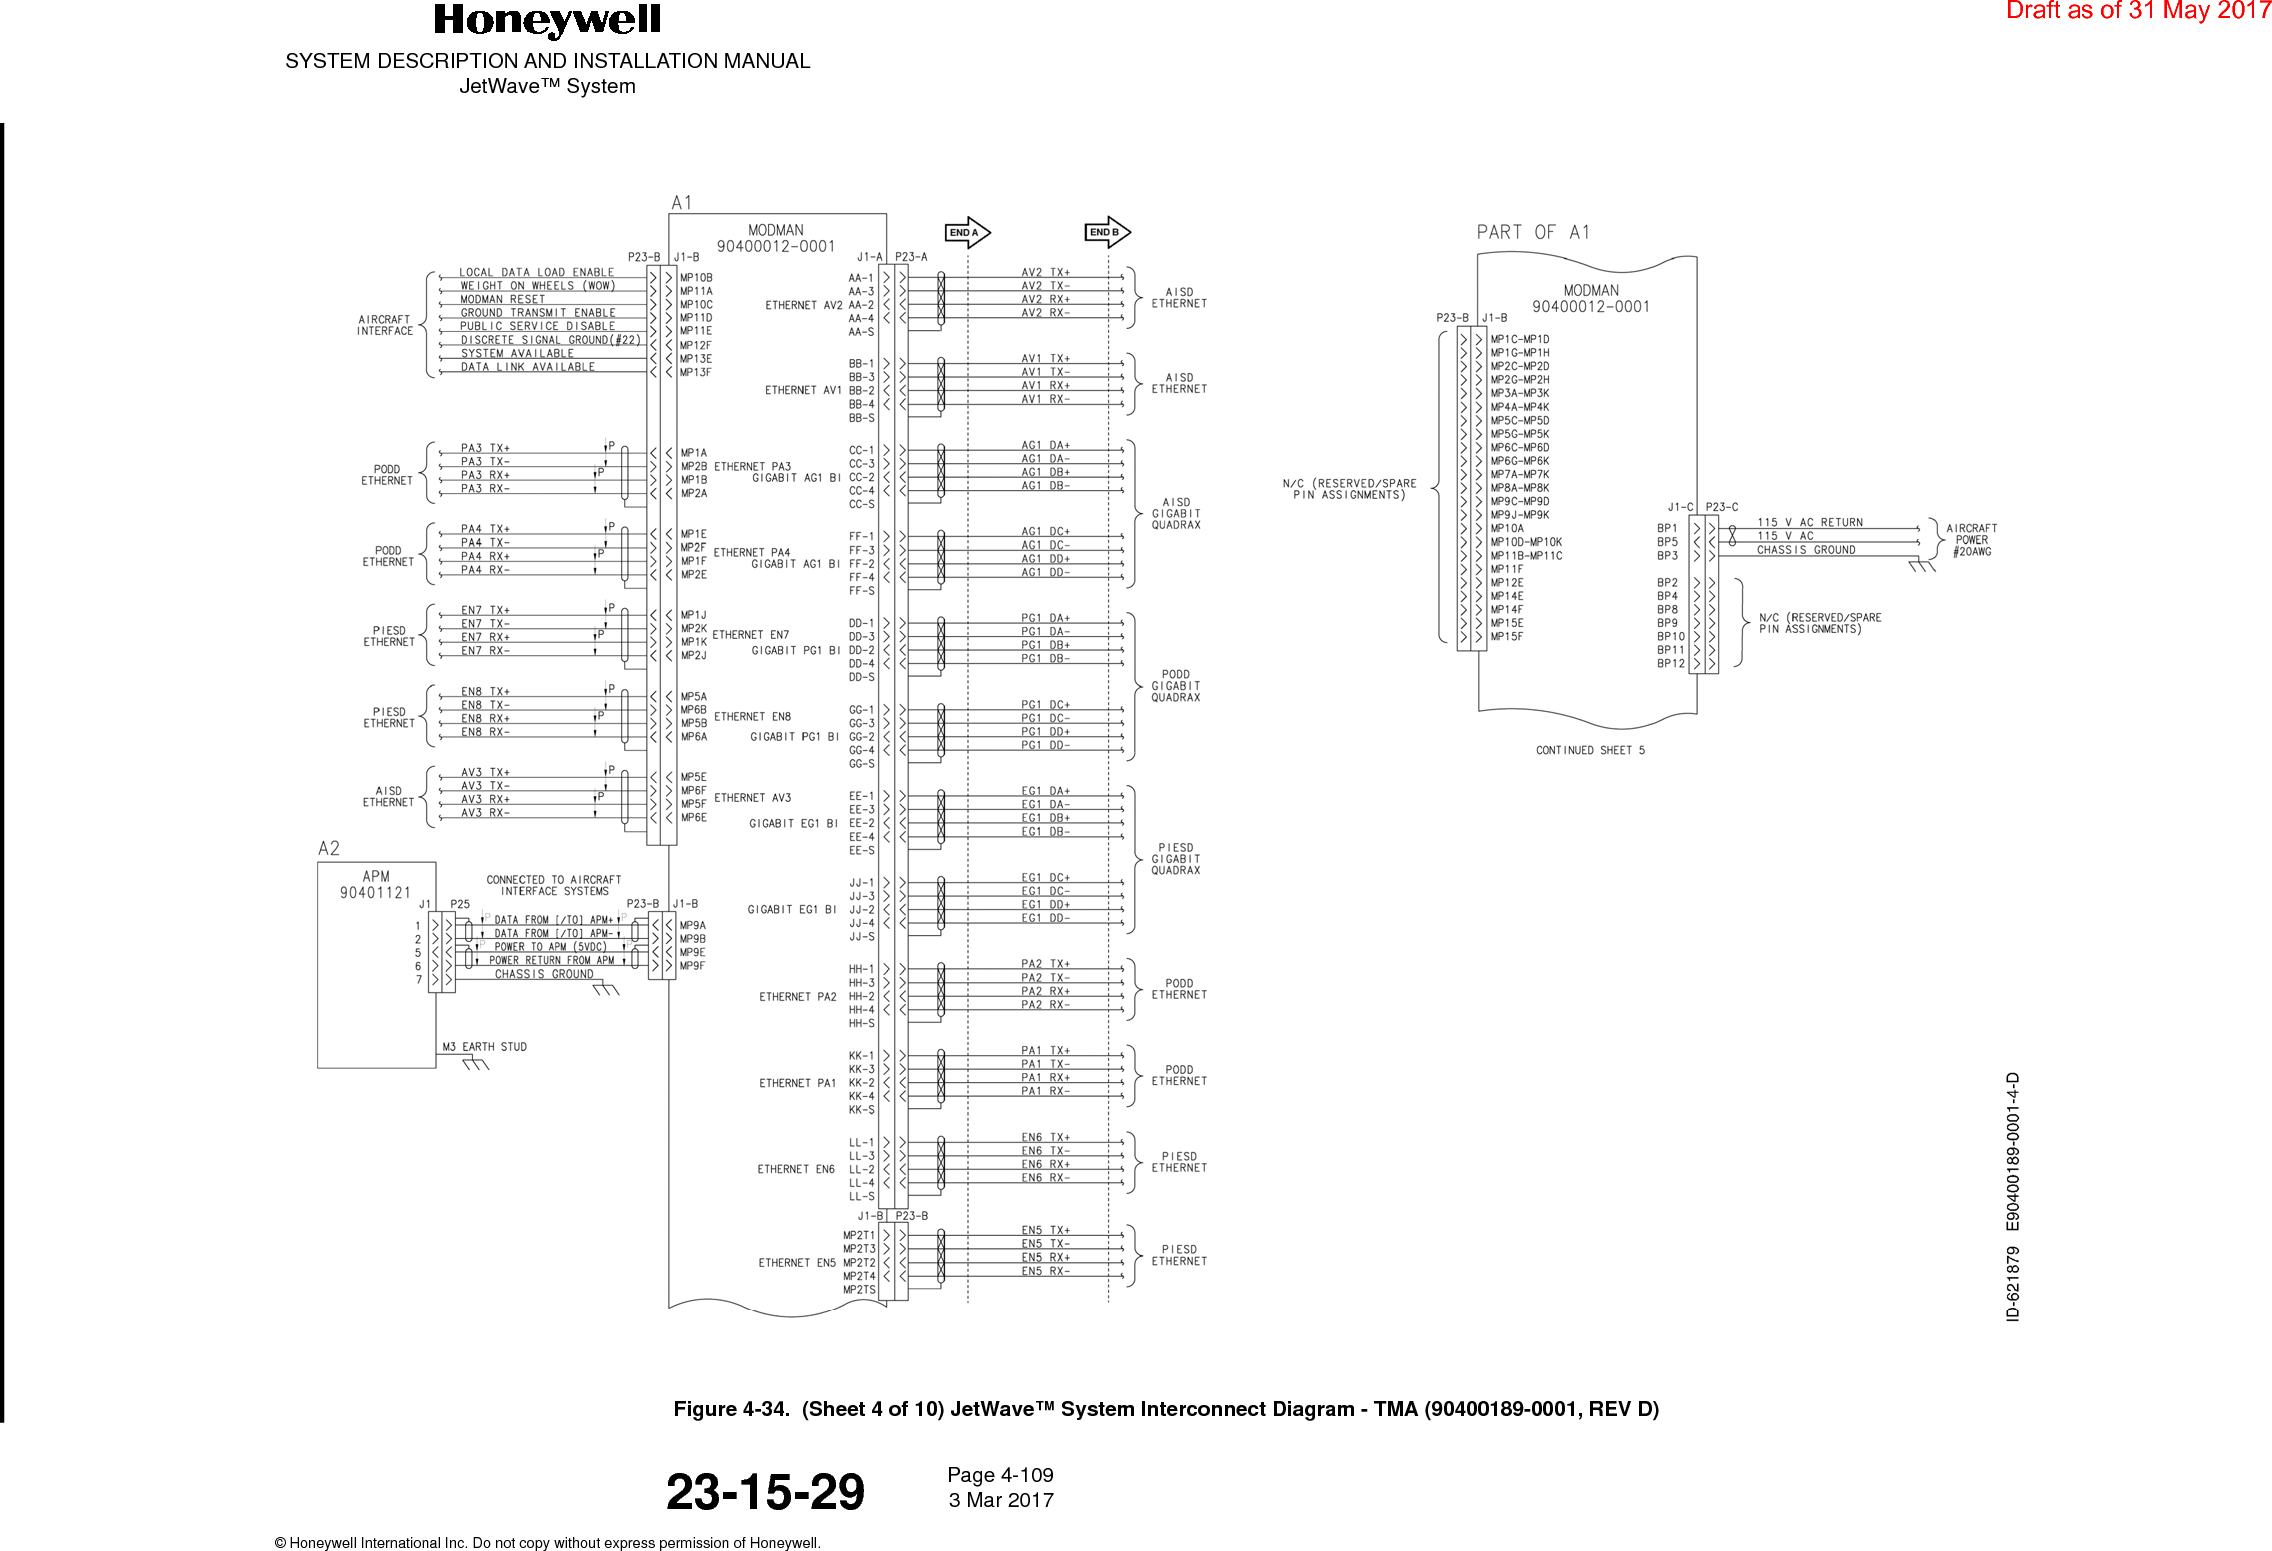 SYSTEM DESCRIPTION AND INSTALLATION MANUALJetWave™ SystemPage 4-109 3 Mar 2017© Honeywell International Inc. Do not copy without express permission of Honeywell.23-15-29Figure 4-34.  (Sheet 4 of 10) JetWave™ System Interconnect Diagram - TMA (90400189-0001, REV D)Draft as of 31 May 2017